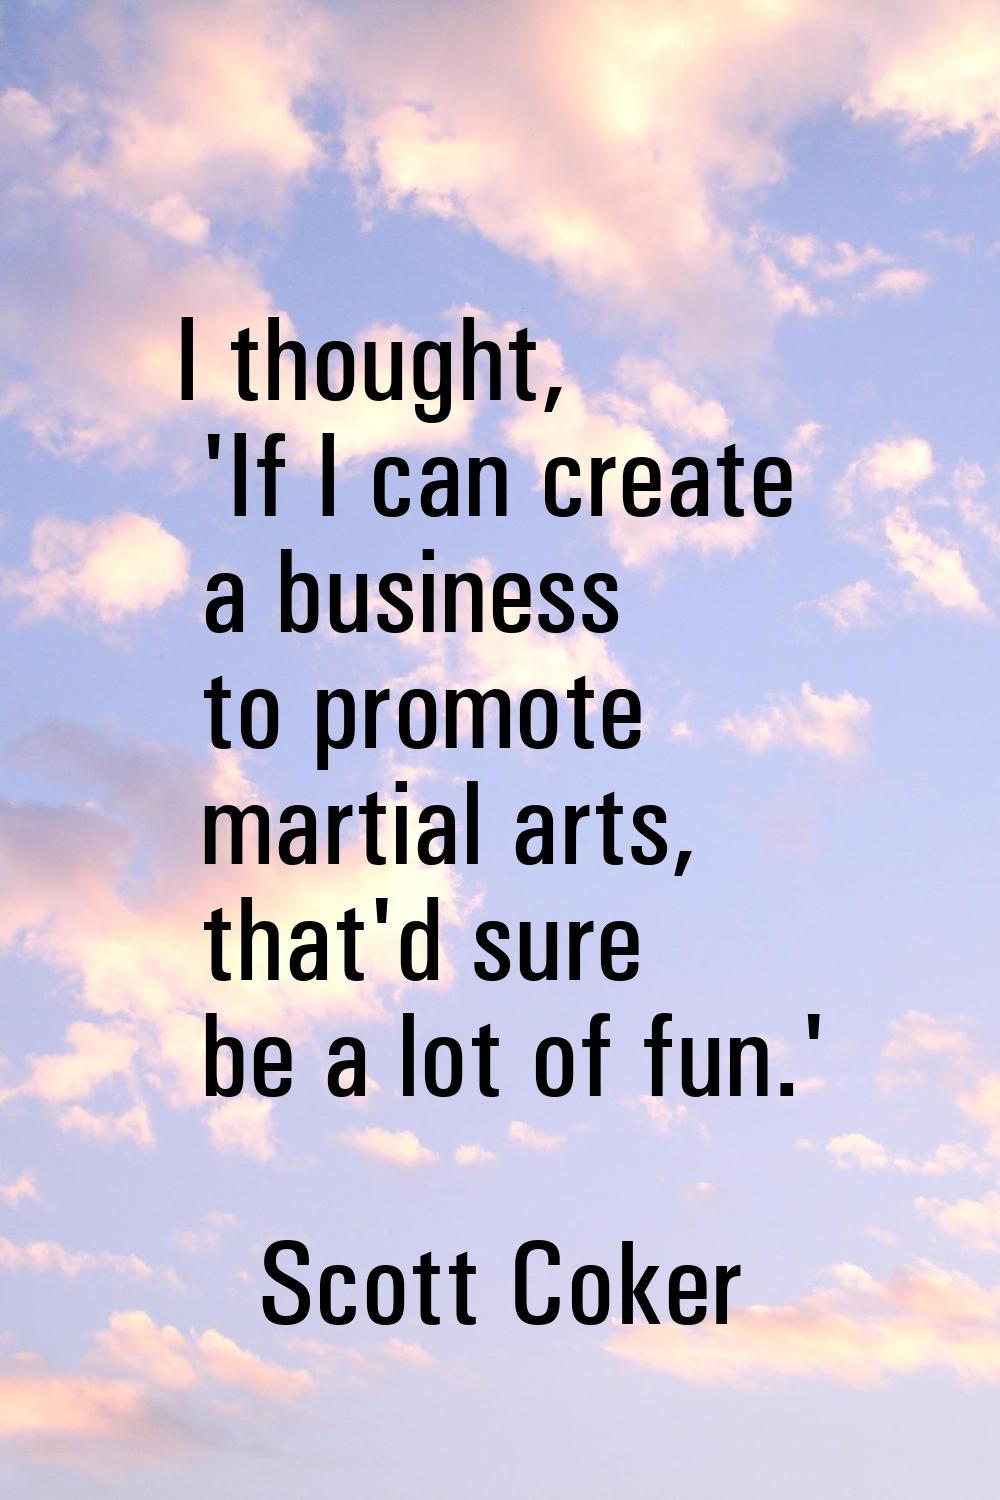 I thought, 'If I can create a business to promote martial arts, that'd sure be a lot of fun.'